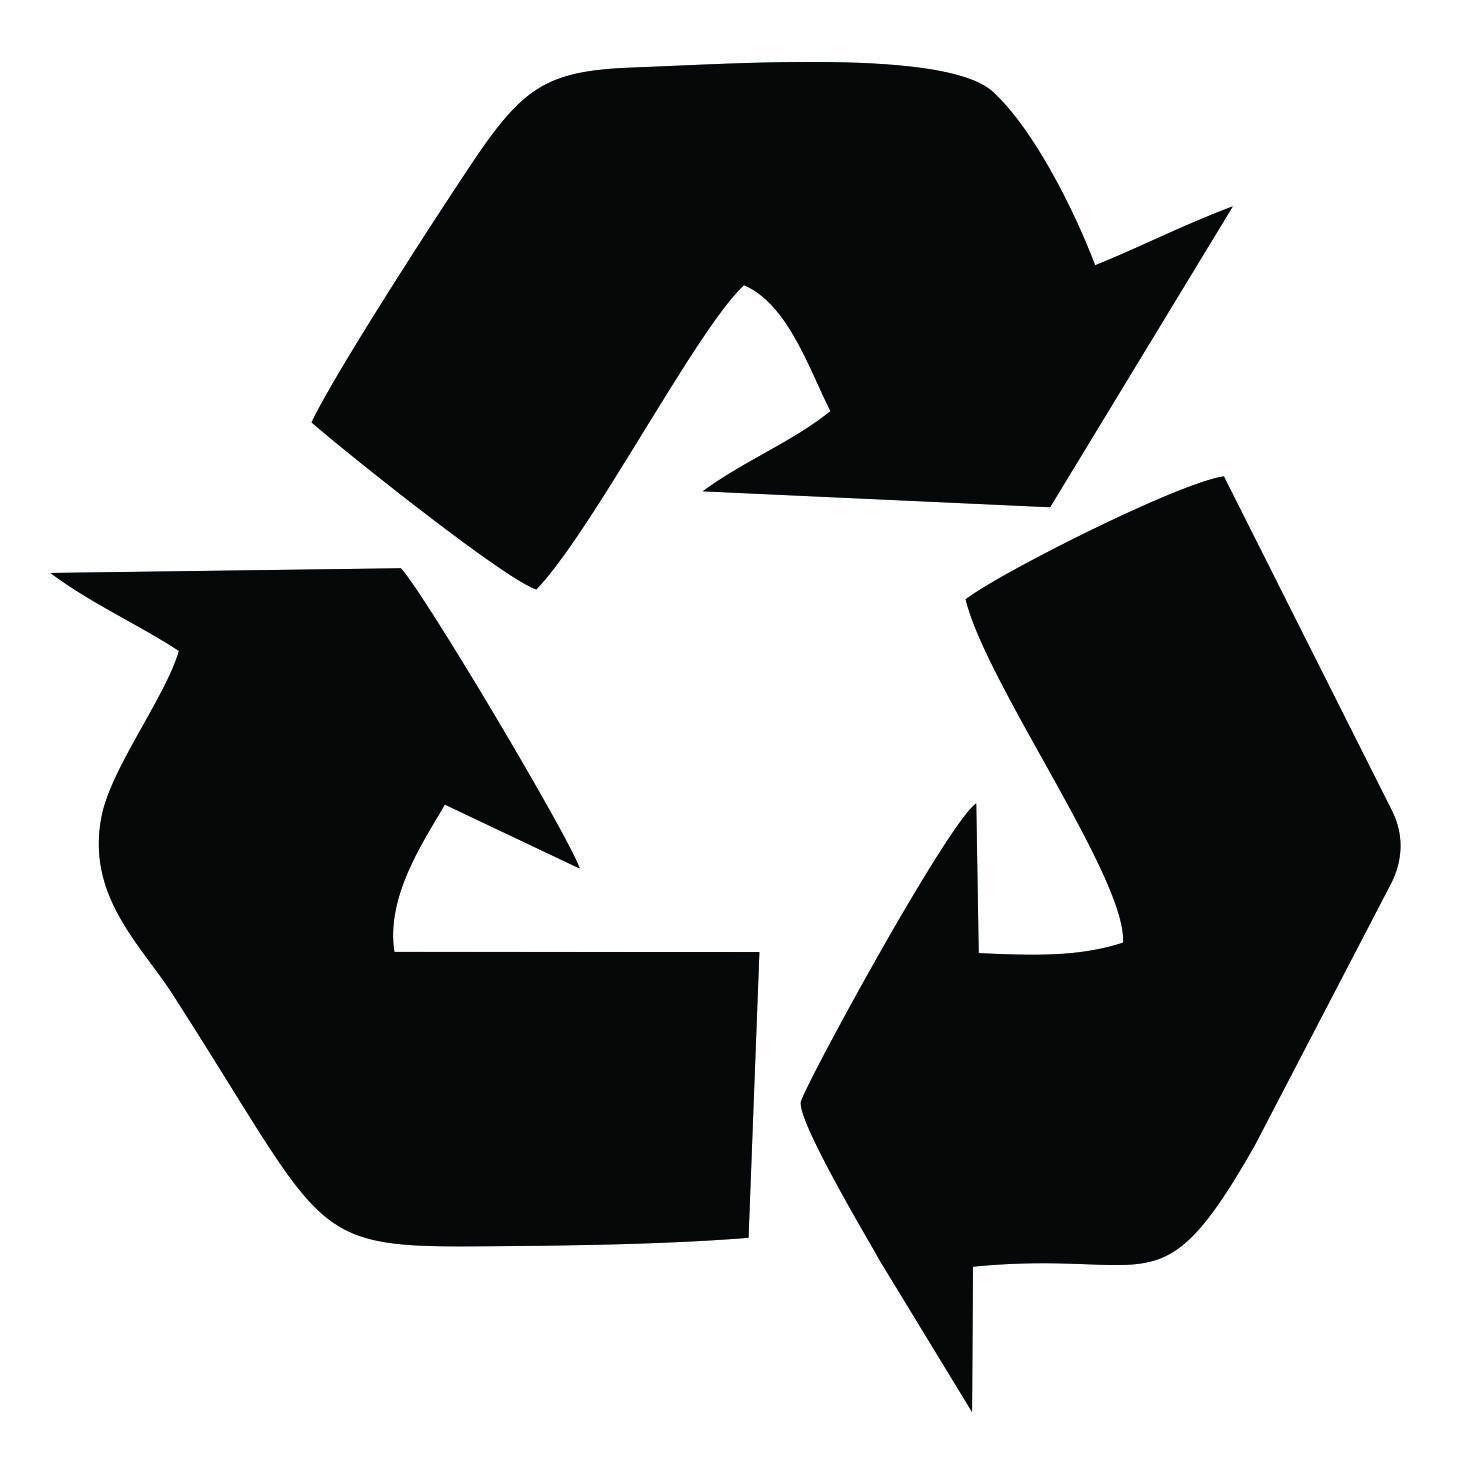 Black and White Recycle Logo - Buy Recycling Symbol BLACK vinyl cut-out sticker 4.5